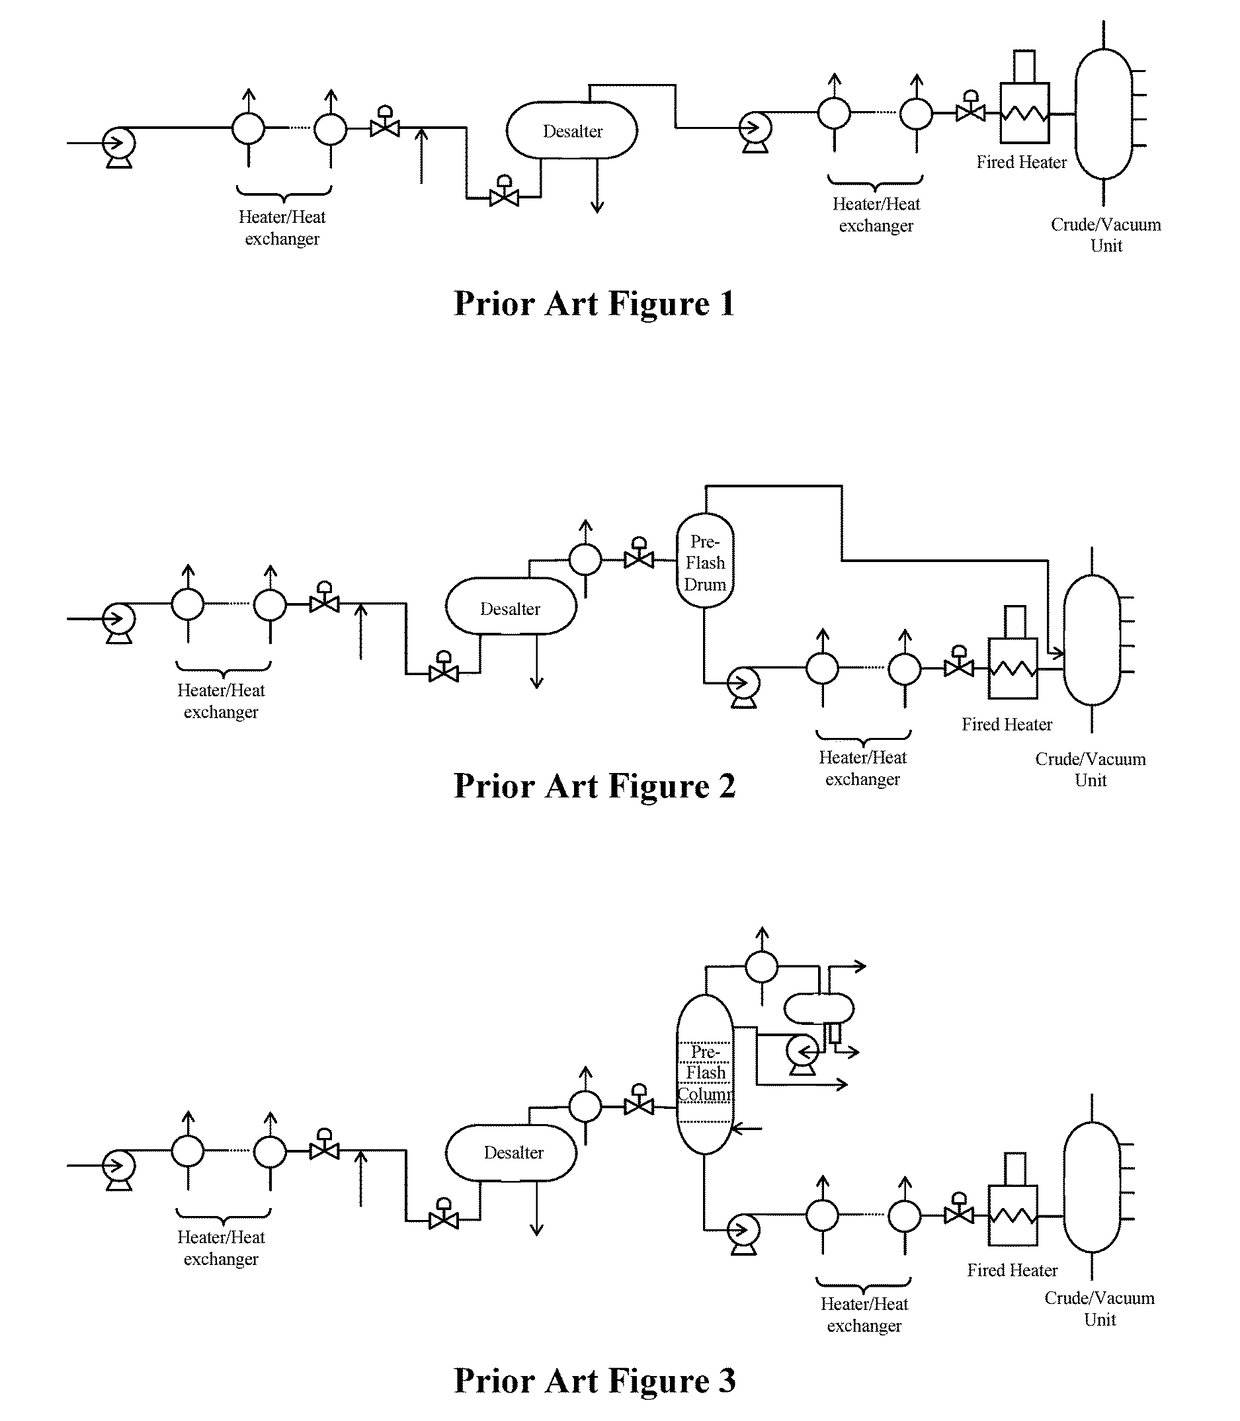 Multiple preflash and exchanger (MPEX) network system for crude and vacuum units